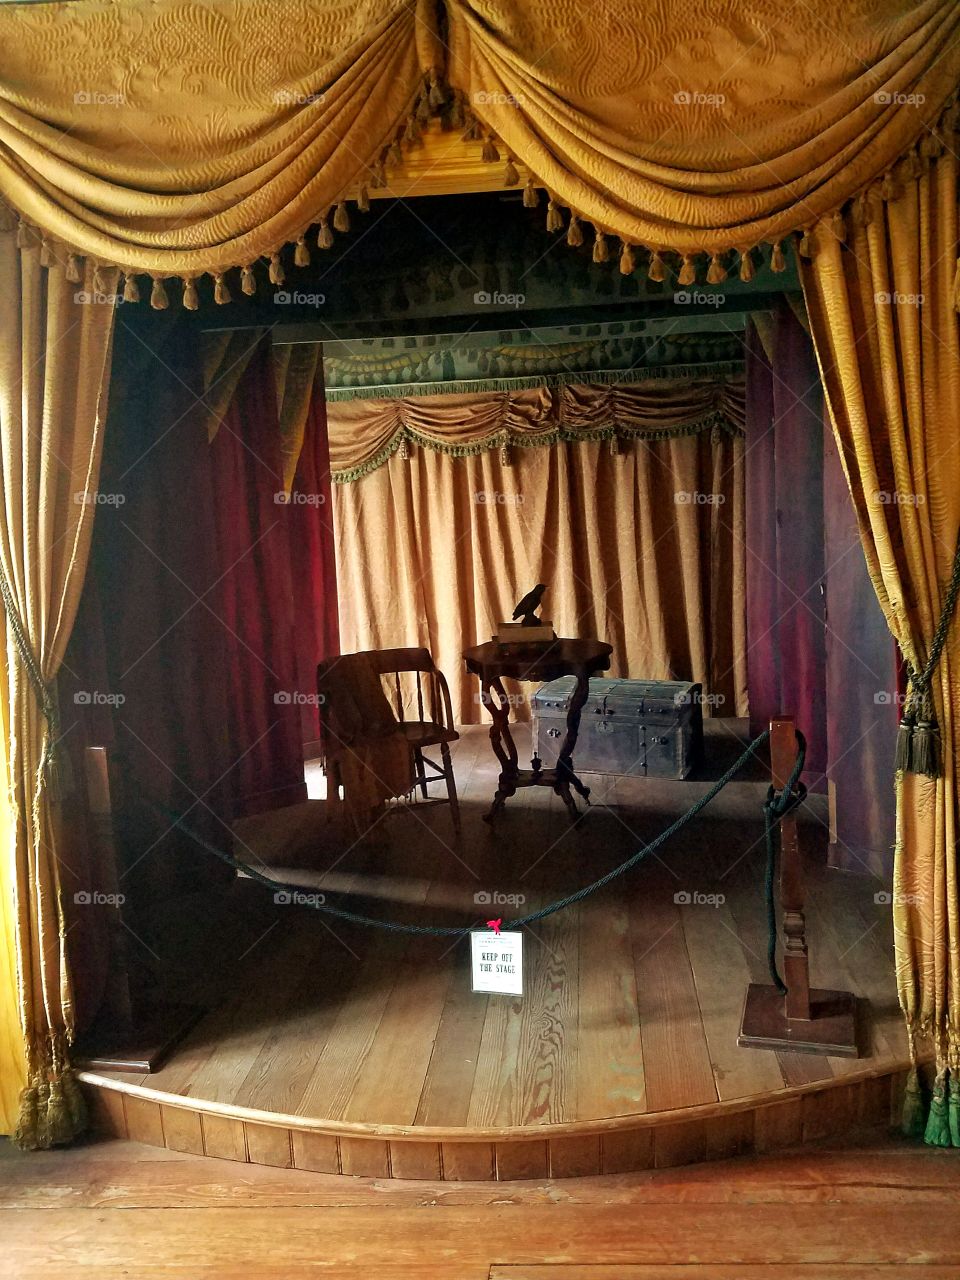 The Whaley House Theatre